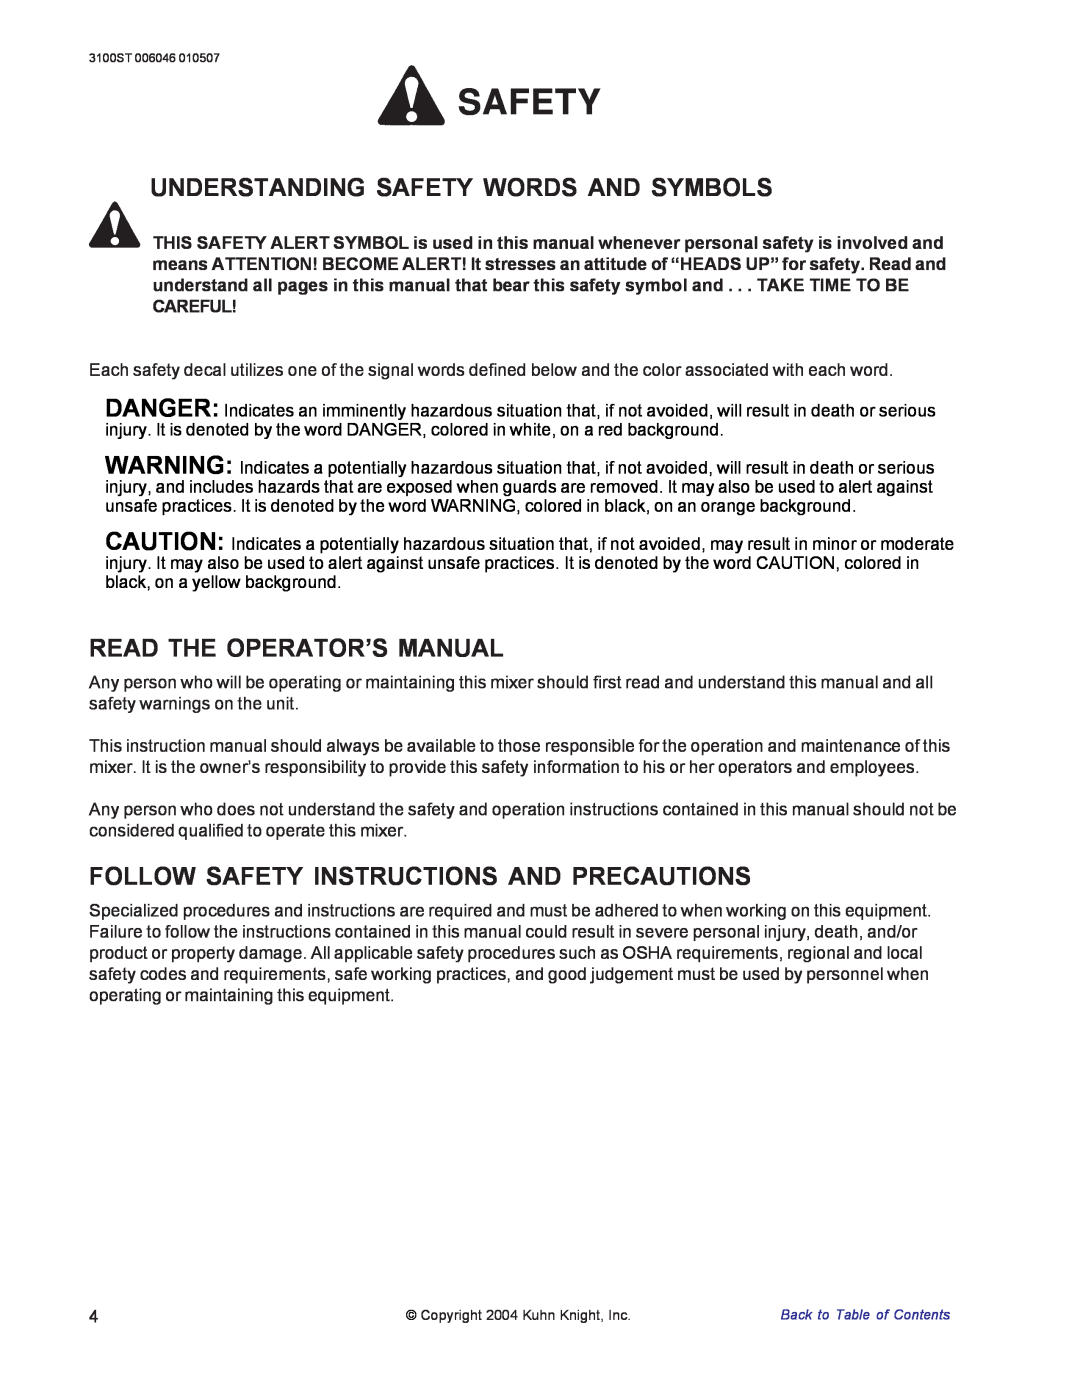 Kuhn Rikon 3100 instruction manual Understanding Safety Words And Symbols, Read The Operator’S Manual 